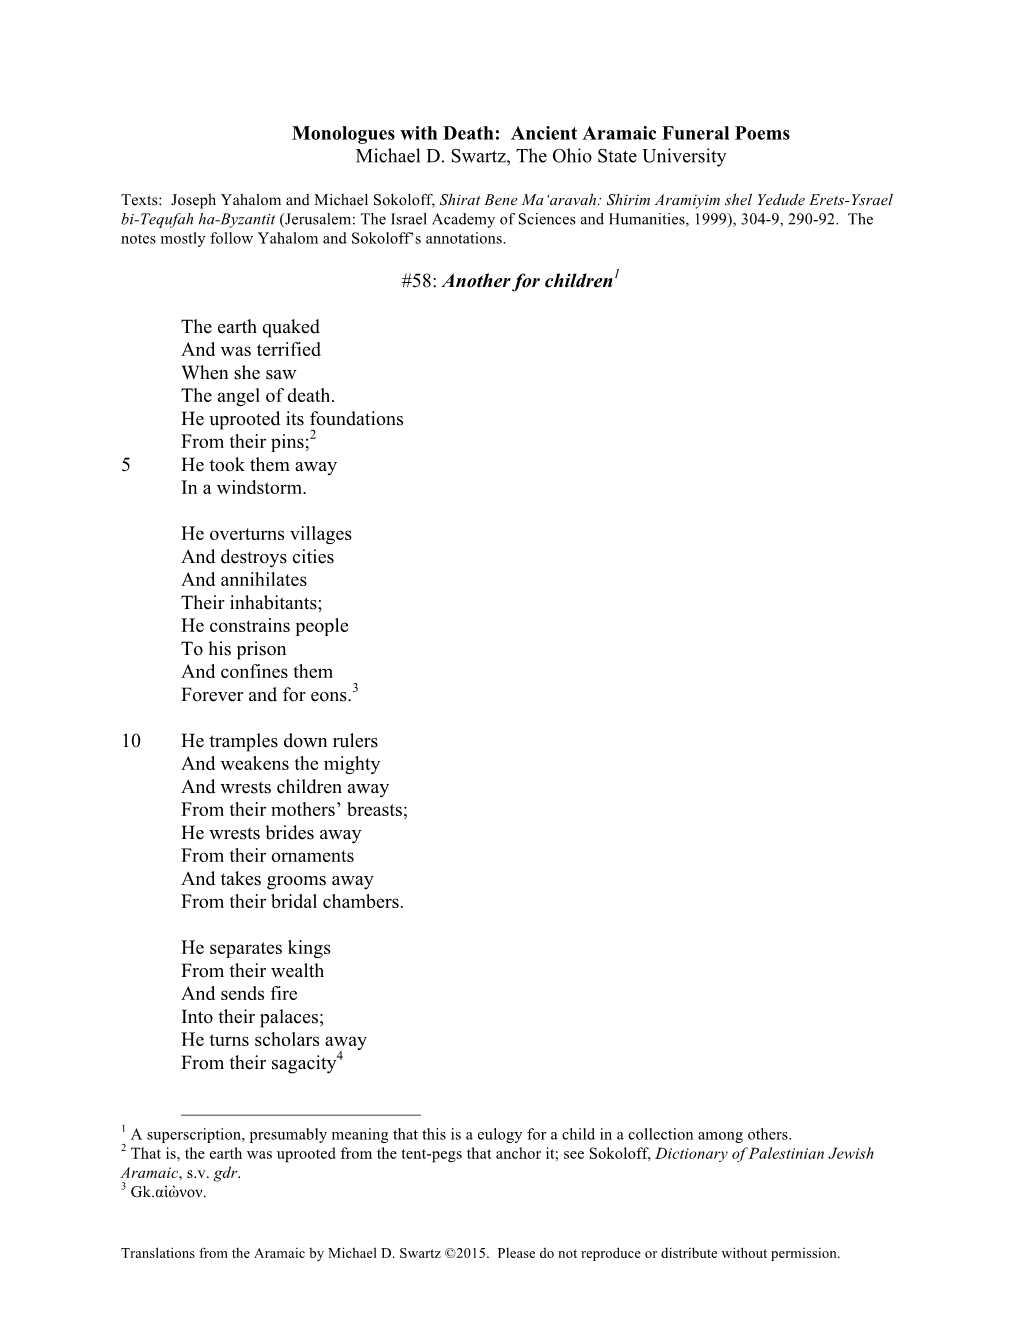 Monologues with Death: Ancient Aramaic Funeral Poems Michael D